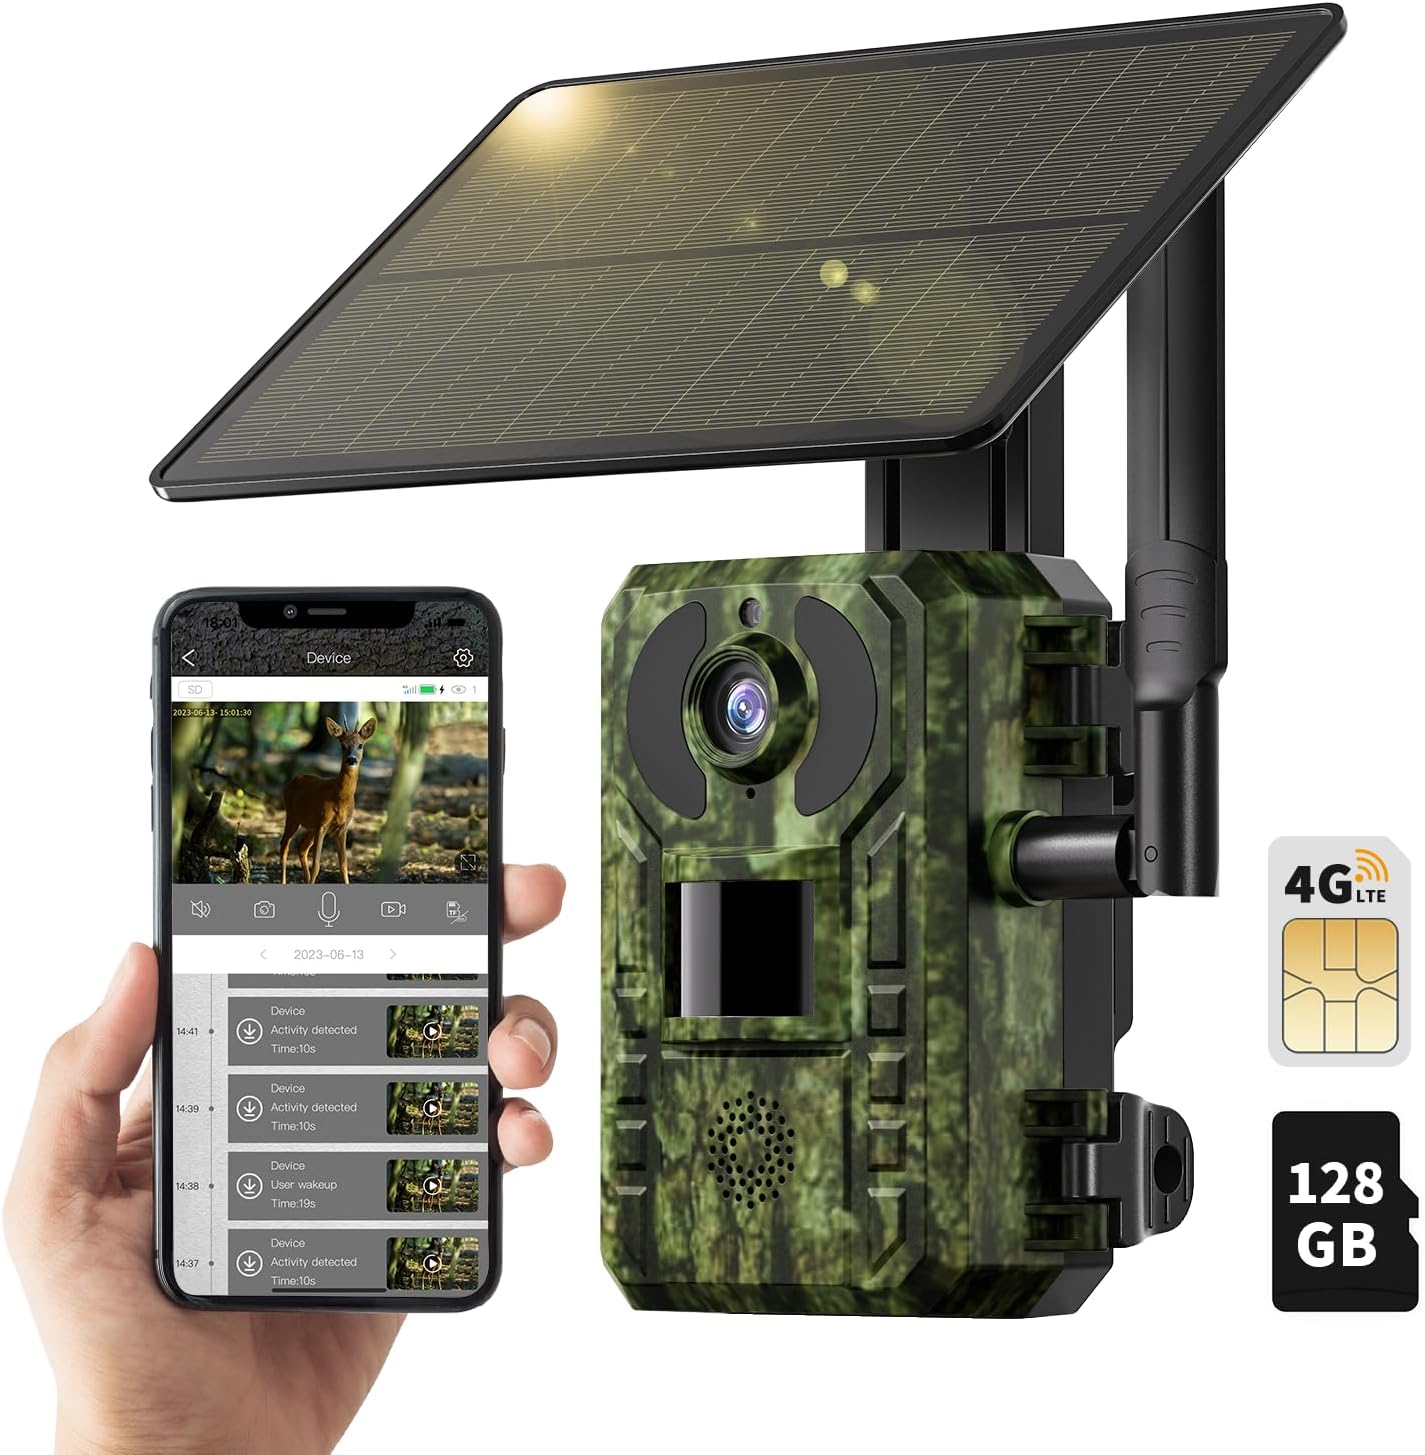 Camouflage designed solar trail camera with a large solar panel, capturing and wirelessly transmitting high-quality wildlife images and videos, displayed on a smartphone.